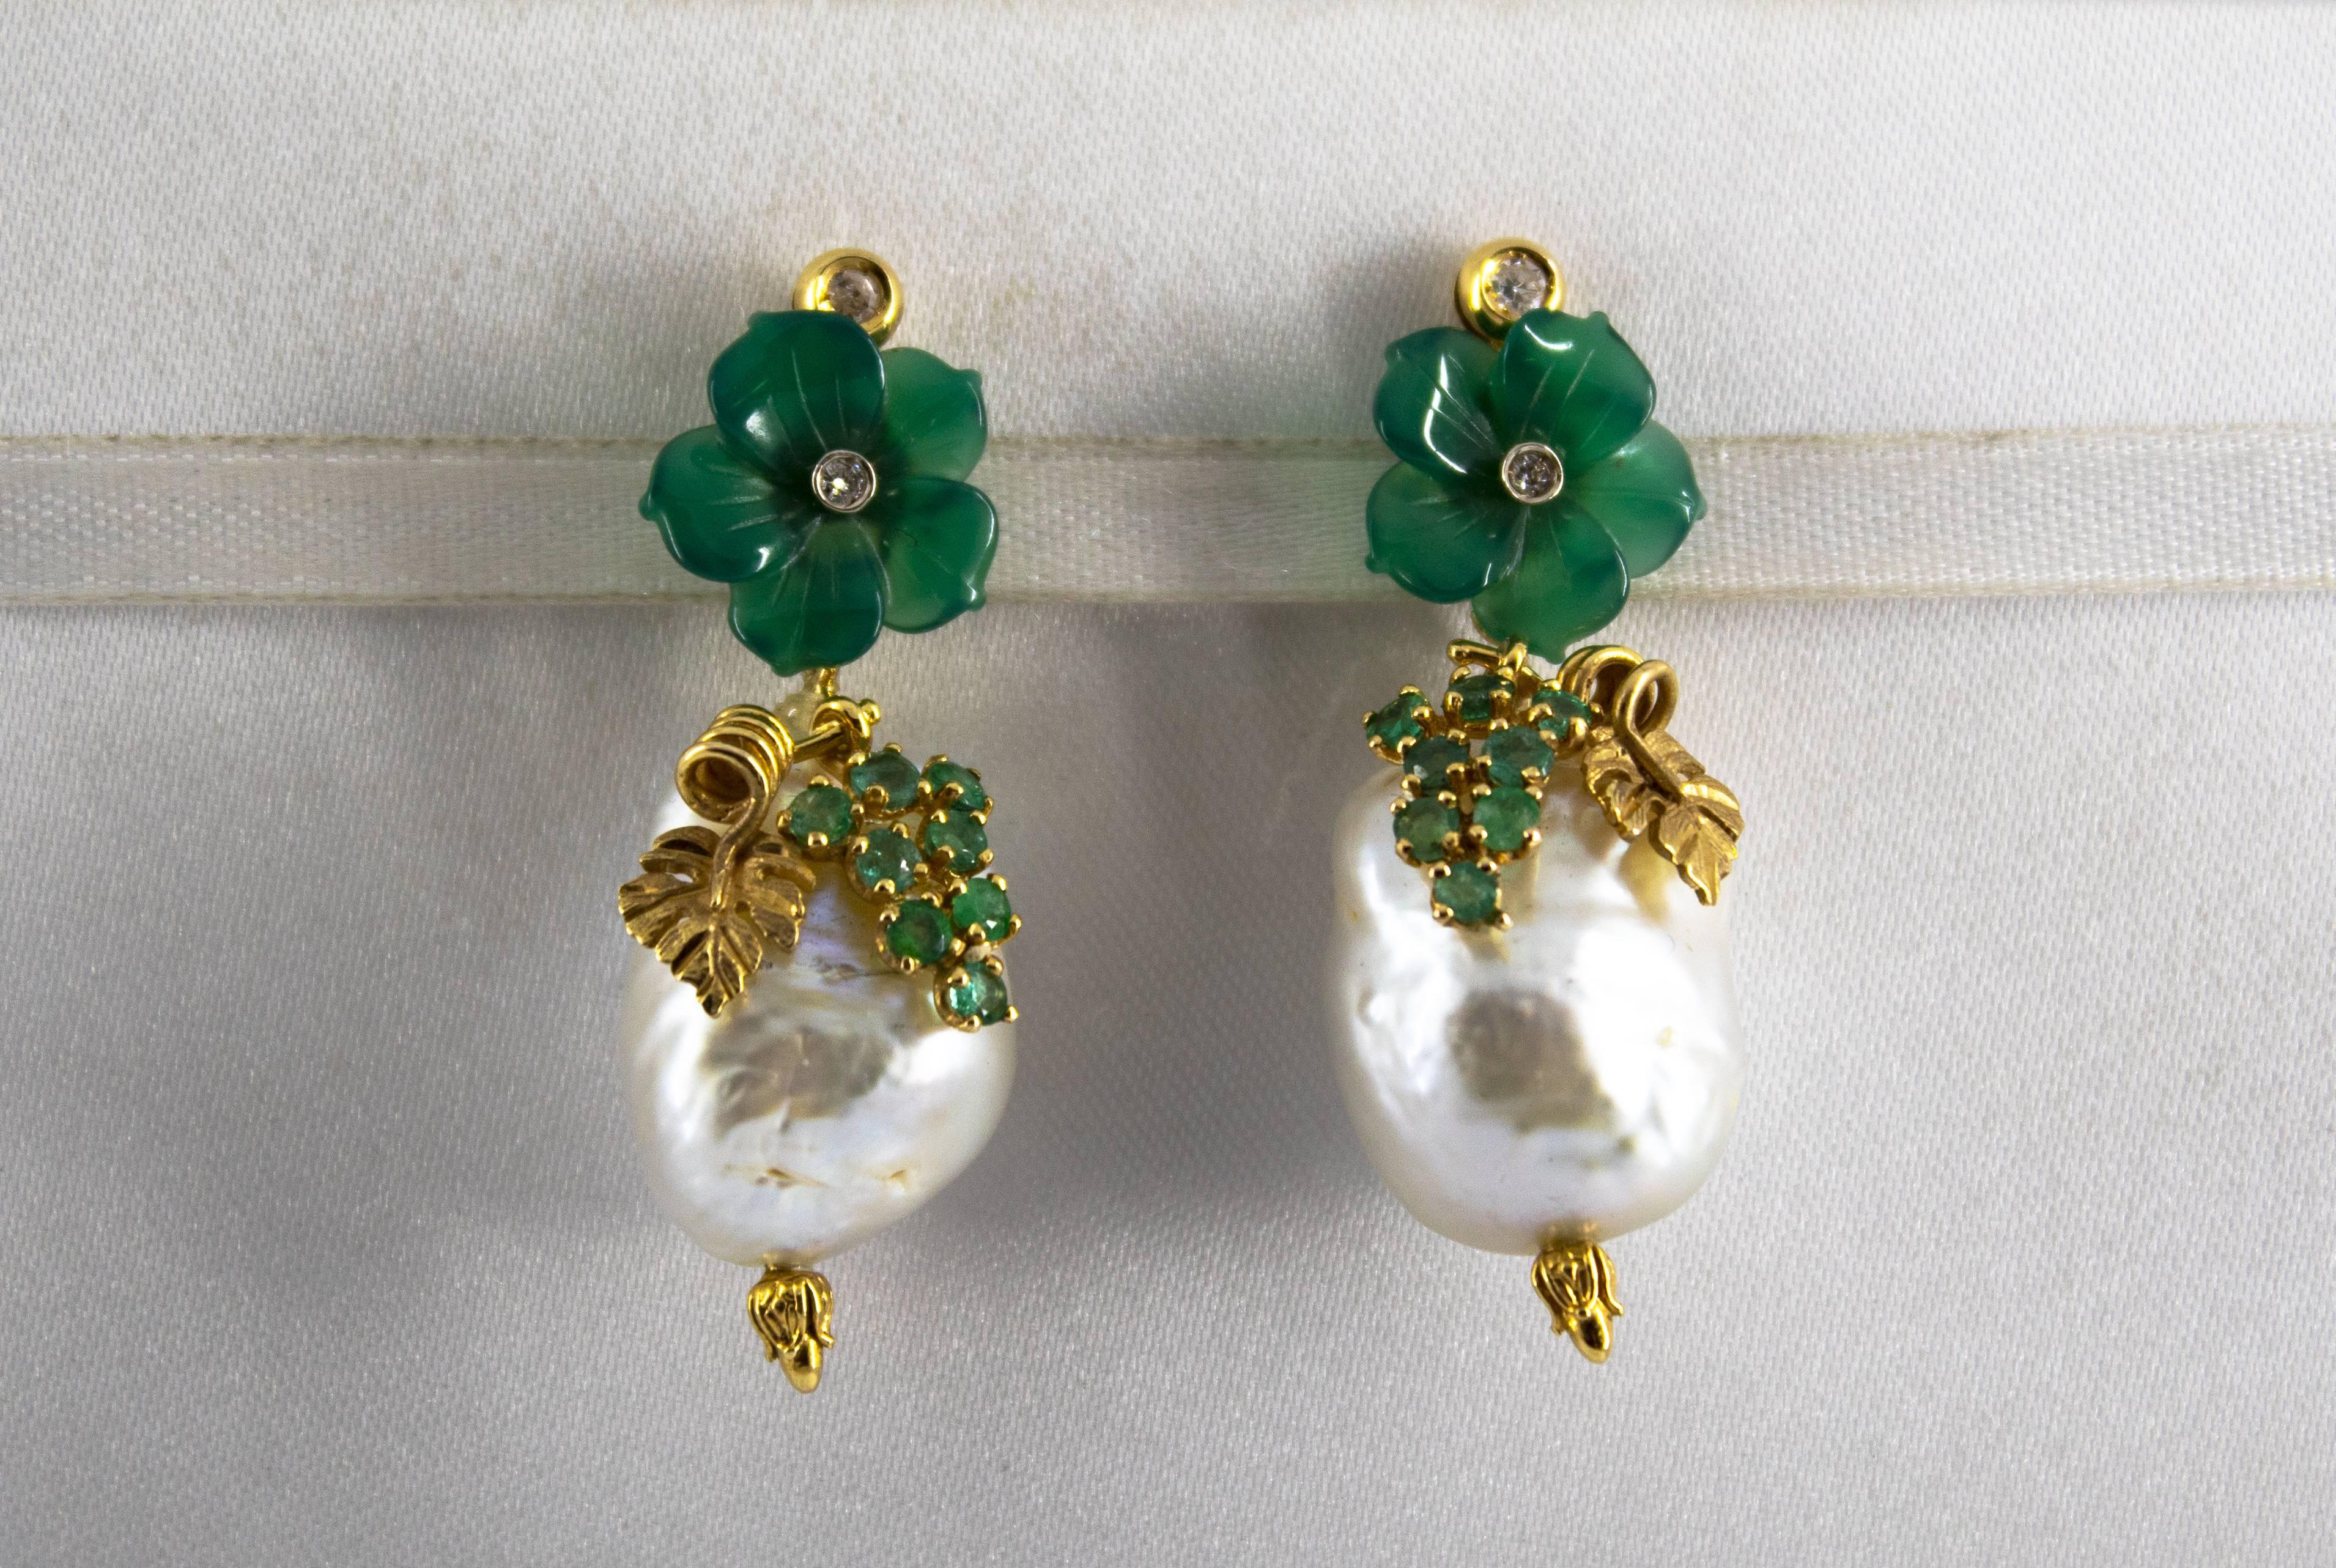 These Stud Earrings are made of 14K Yellow Gold.
These Earrings have 0.12 Carats of Diamonds.
These Earrings have 0.90 Carats of Emeralds.
These Earrings have also Pearls and Agate.
These Earrings are available also with Purple Amethyst Flowers and